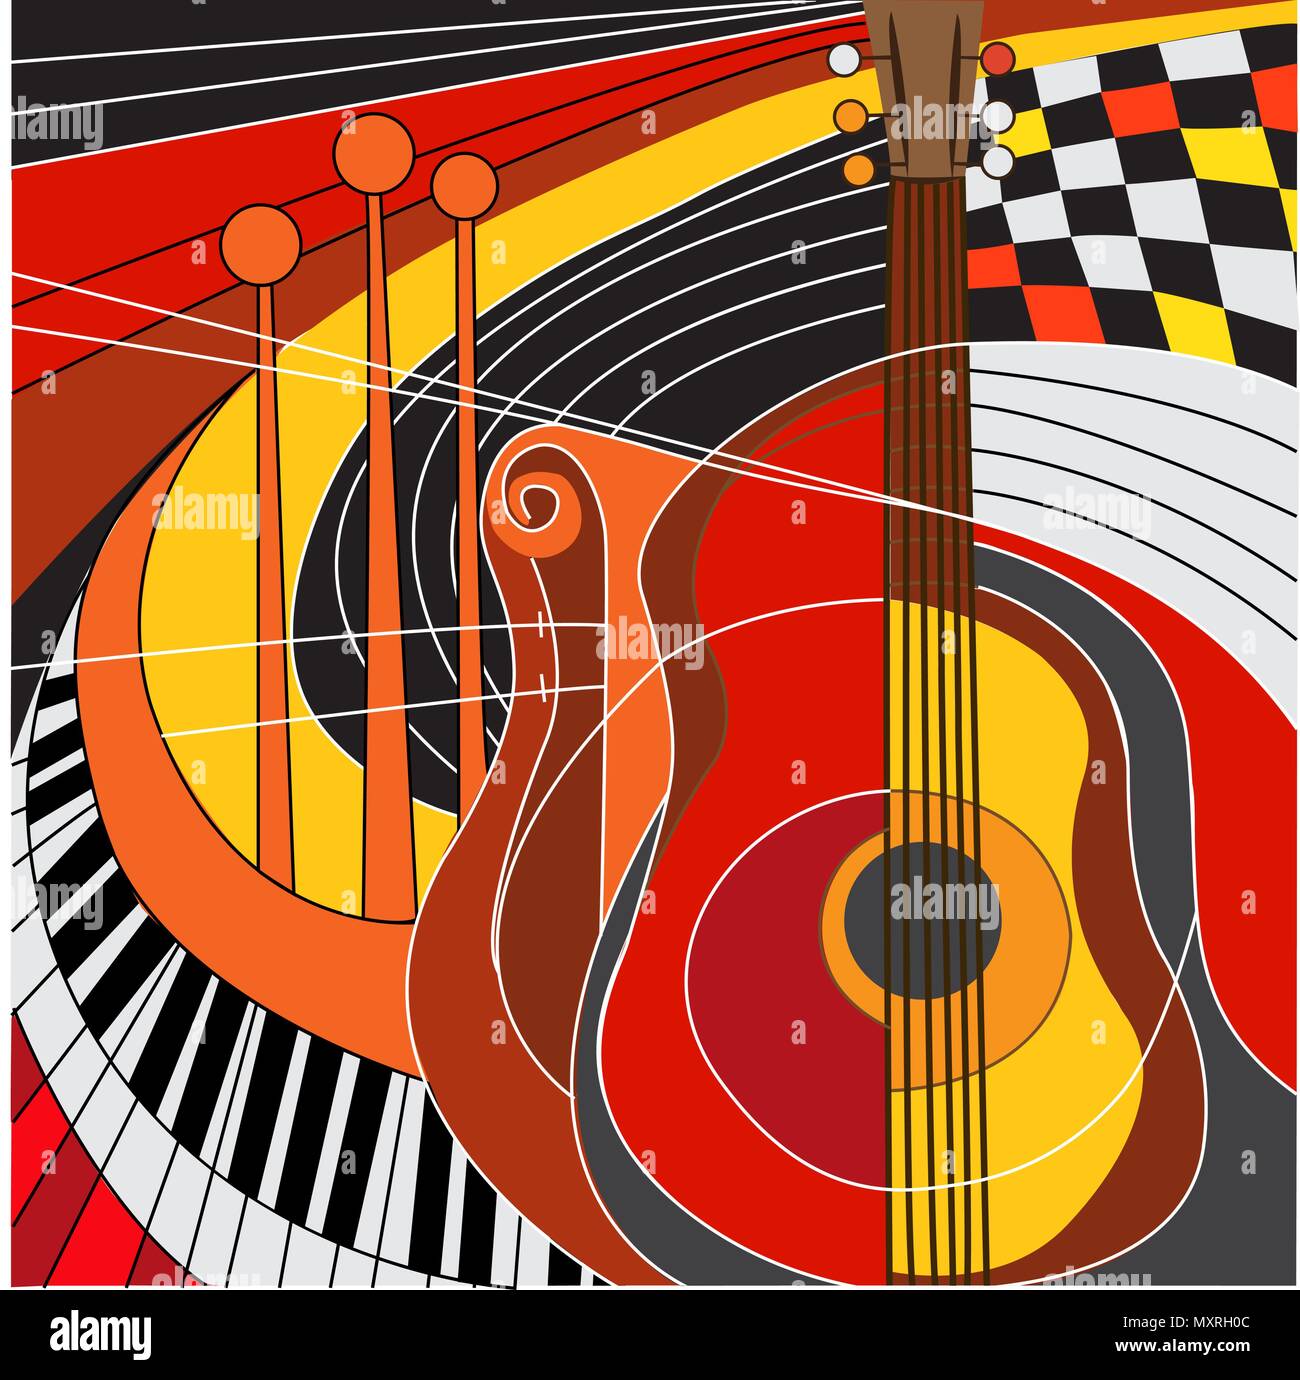 Colorful illustration of musical instruments Stock Vector